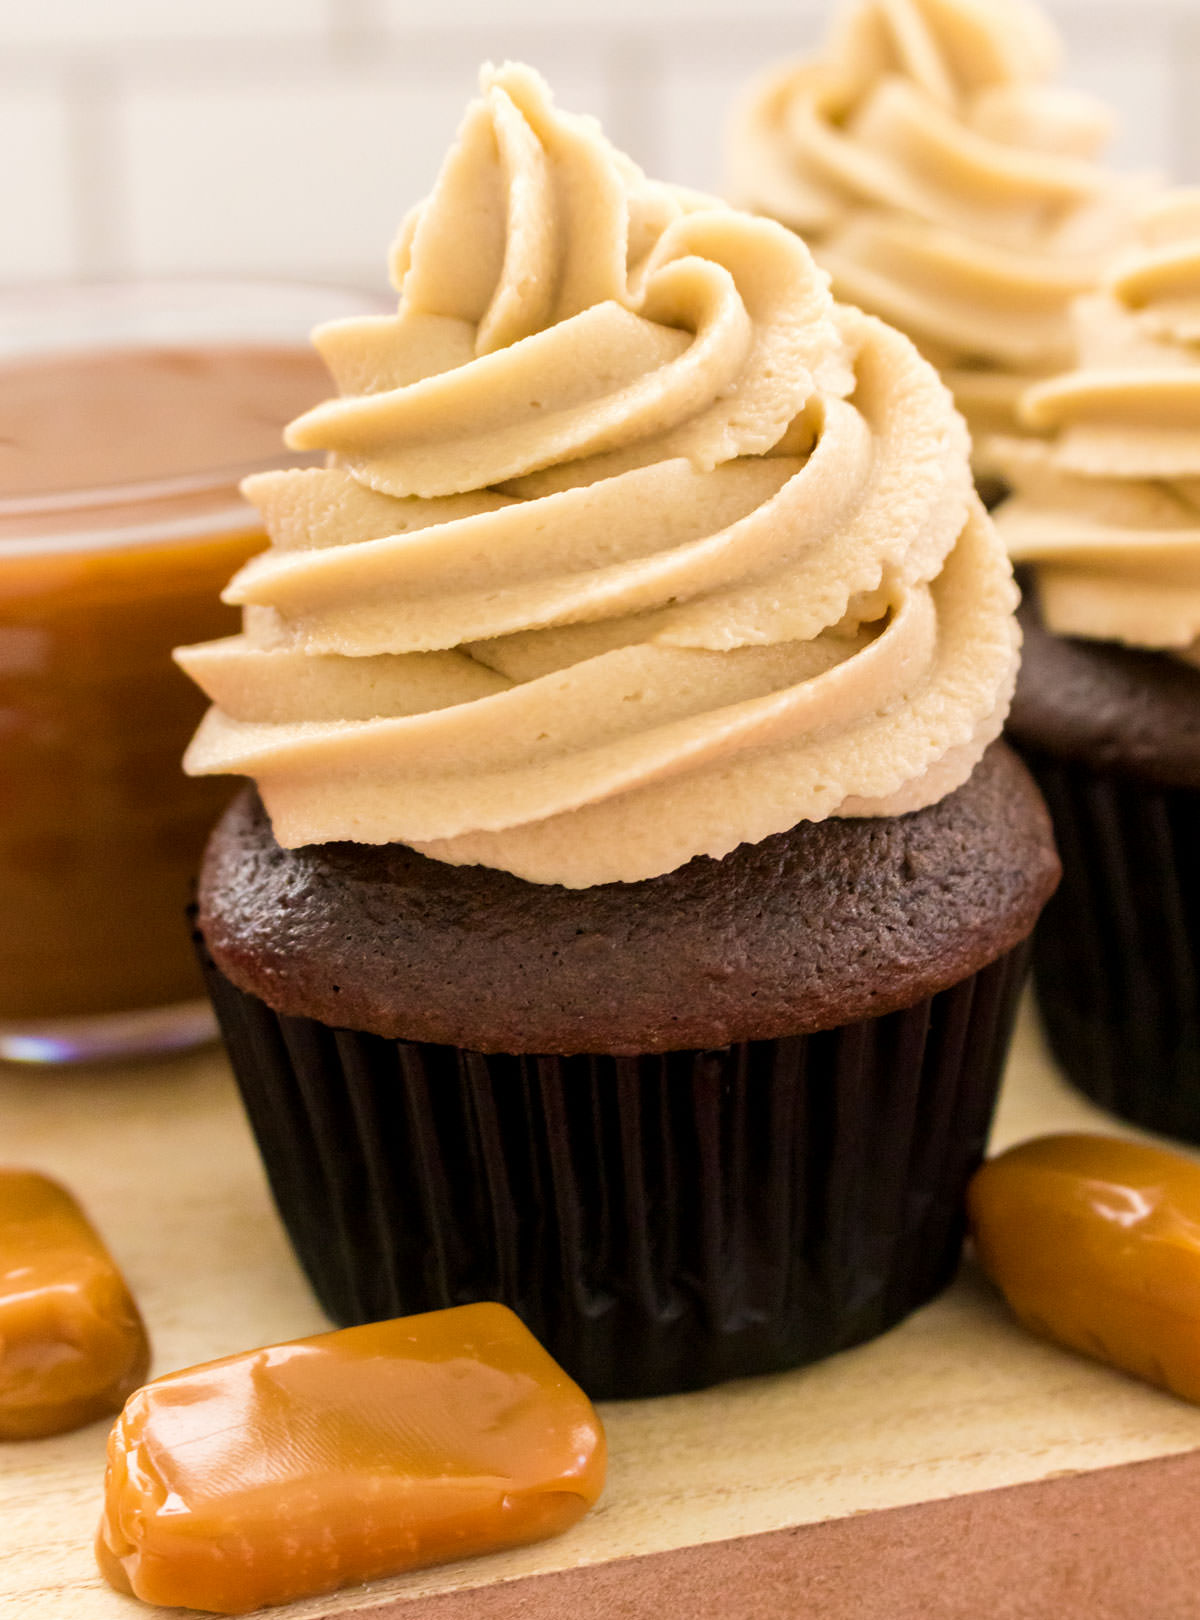 Closeup on two chocolate cupcakes frosted with The Best Caramel Buttercream Frosting sitting next to a bowl of caramel sauce.